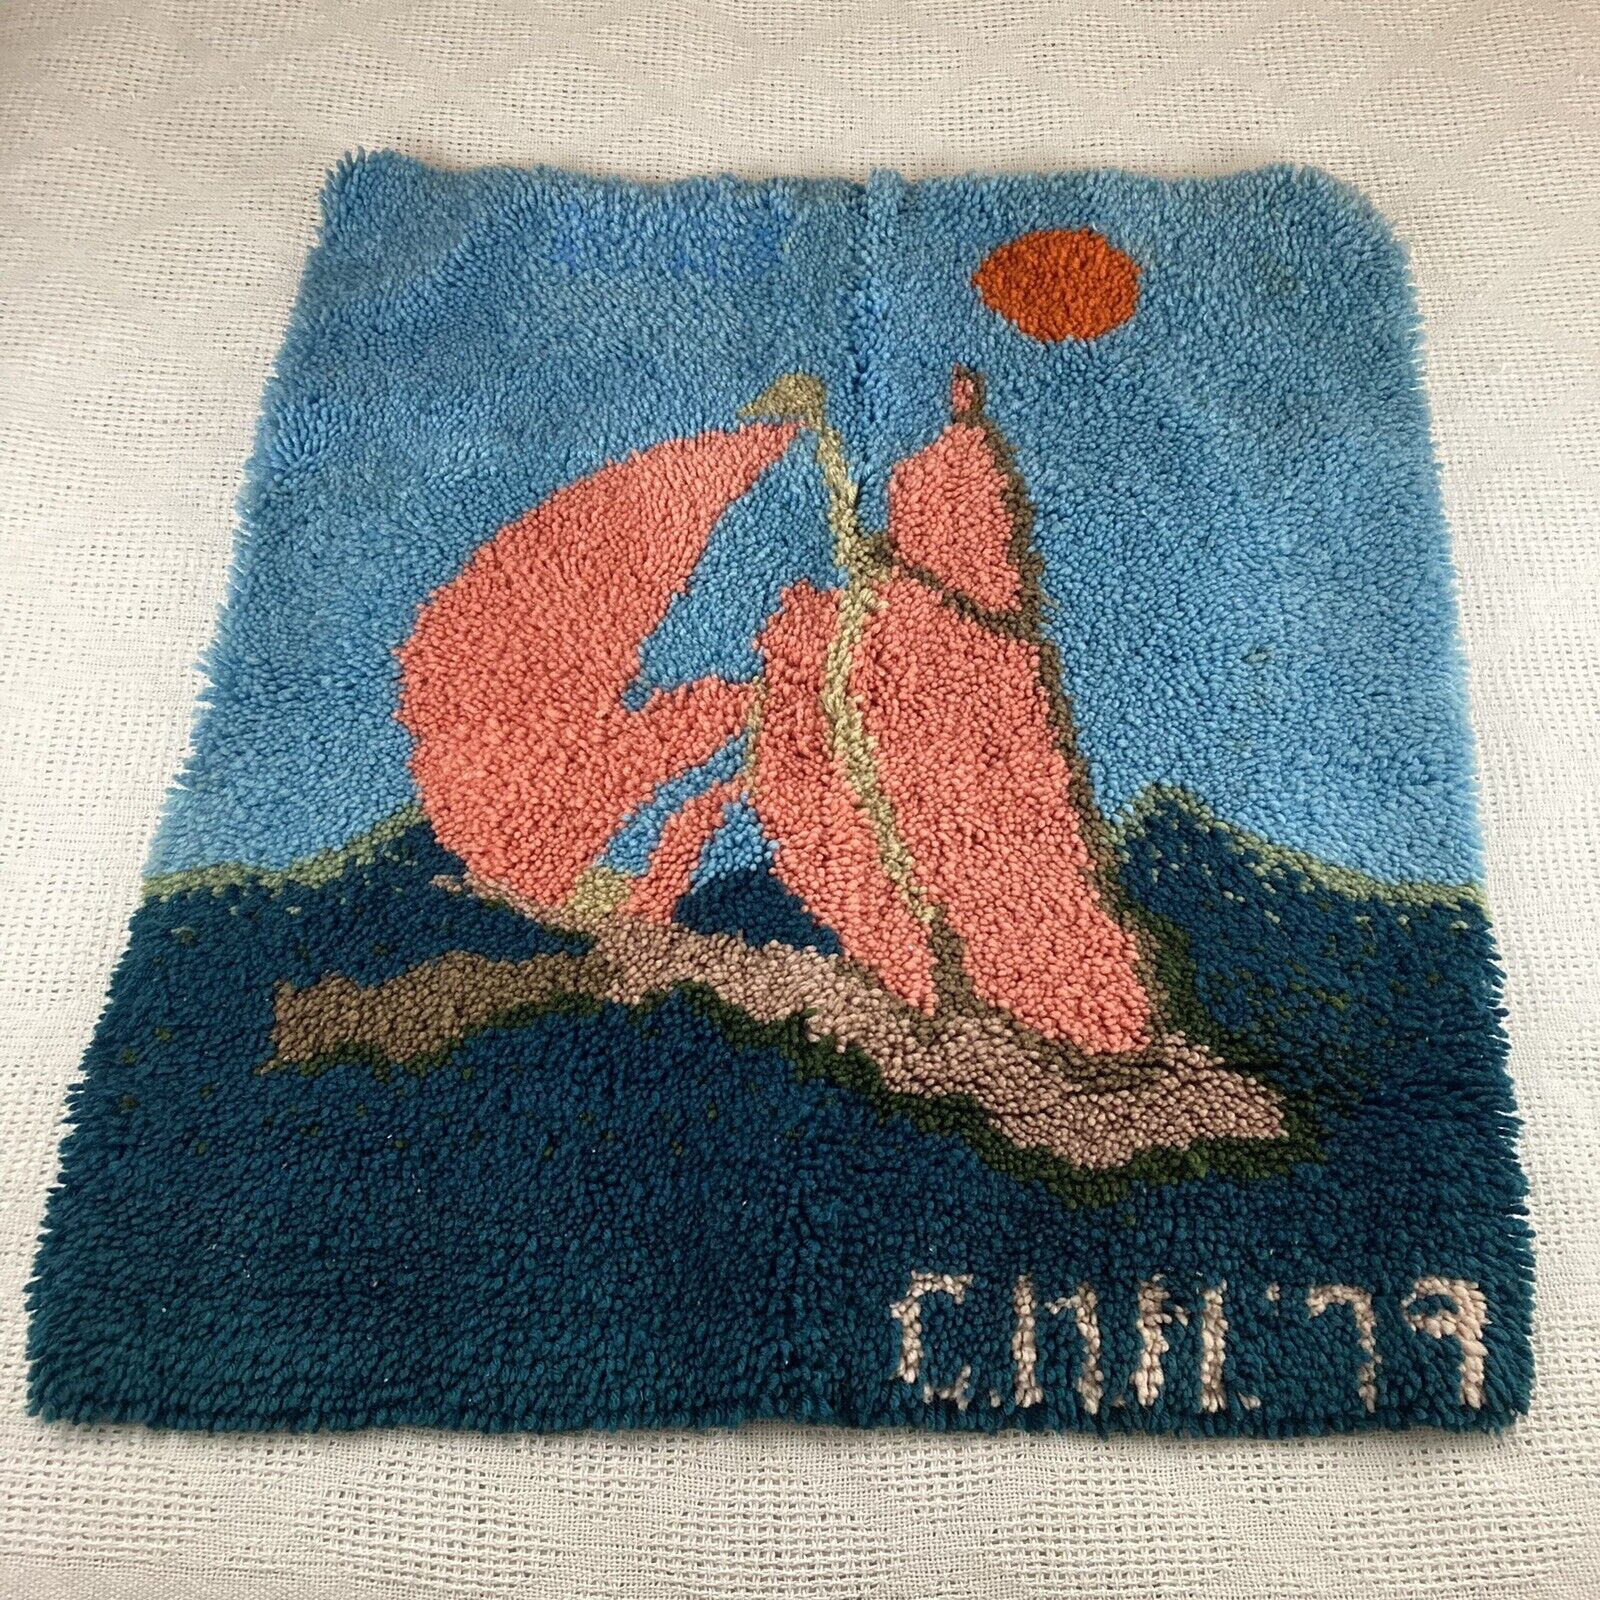 Vintage Hand Made 1979 Nautical Sailboat Latch Hook Yarn Rug Tapestry Pink Blue